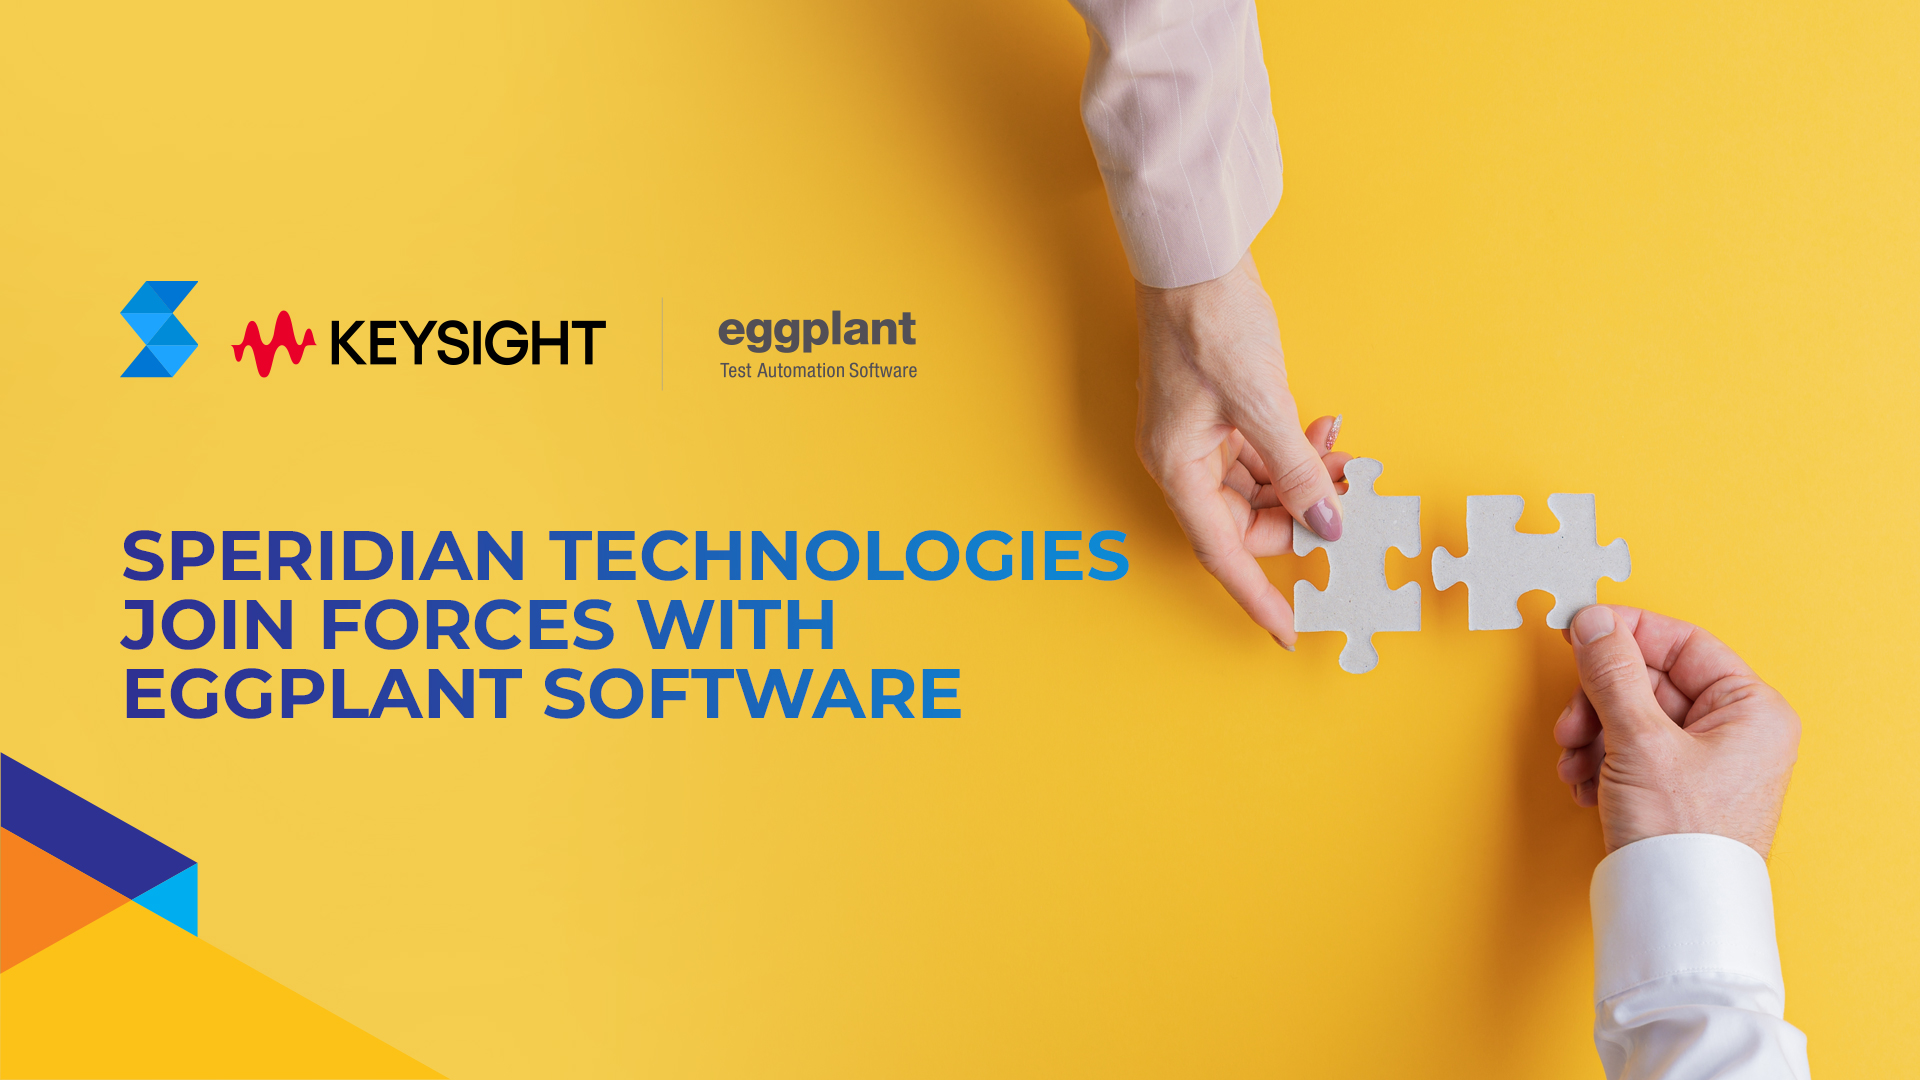 Speridian Technologies Join Forces with Eggplant Software